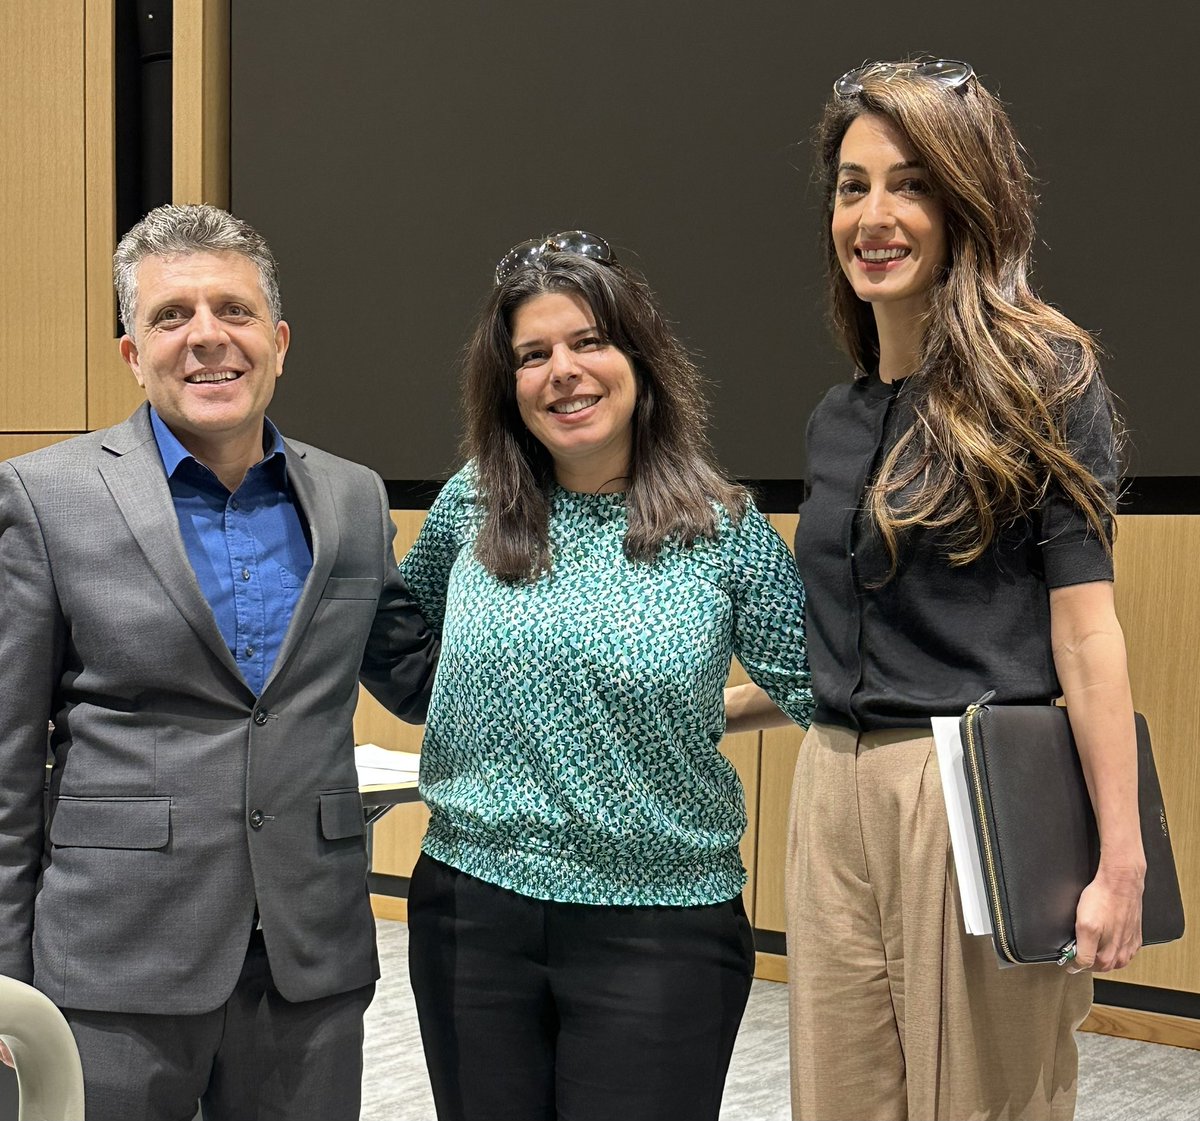 So pleased to help #Lincoln #Yazda co-founder @pir_hadi host Mrs. #AmalClooney @UNLincoln to address the plight of #Yazidi refugees who were harmed or suffered under ISIS. @UNL_CEHS @UNLTLTEGRAD @NebraskaGlobal @UNLGlobalEx